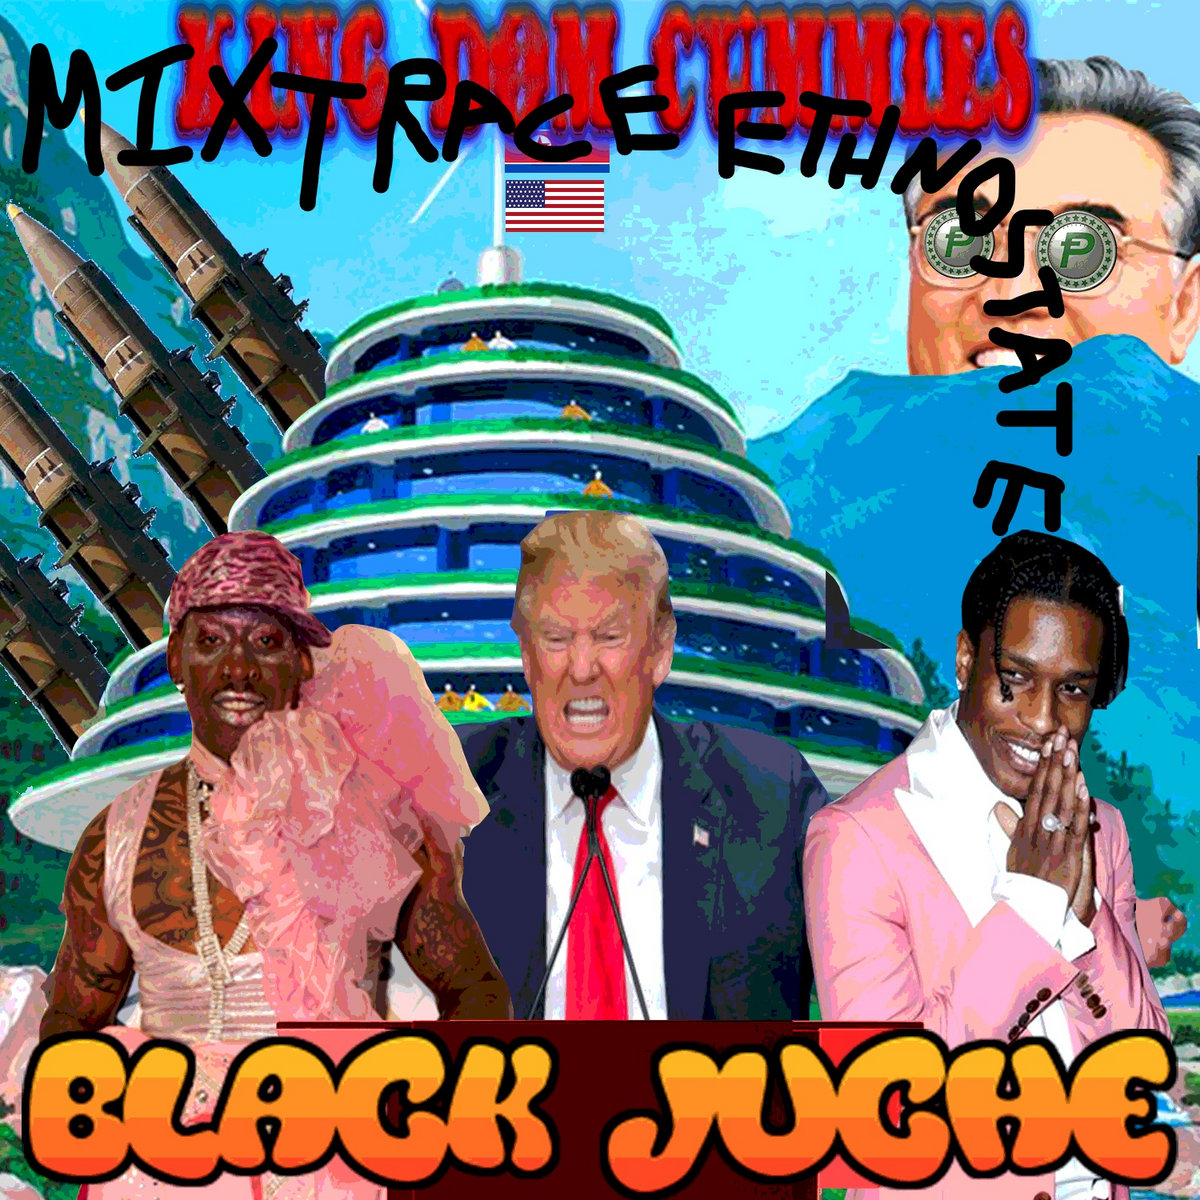 Album art depicting Donald Trump, A$AP Rocky, and Dennis Rodman in a DPRK landscape, with Kim Il-sung looking over a mountain.